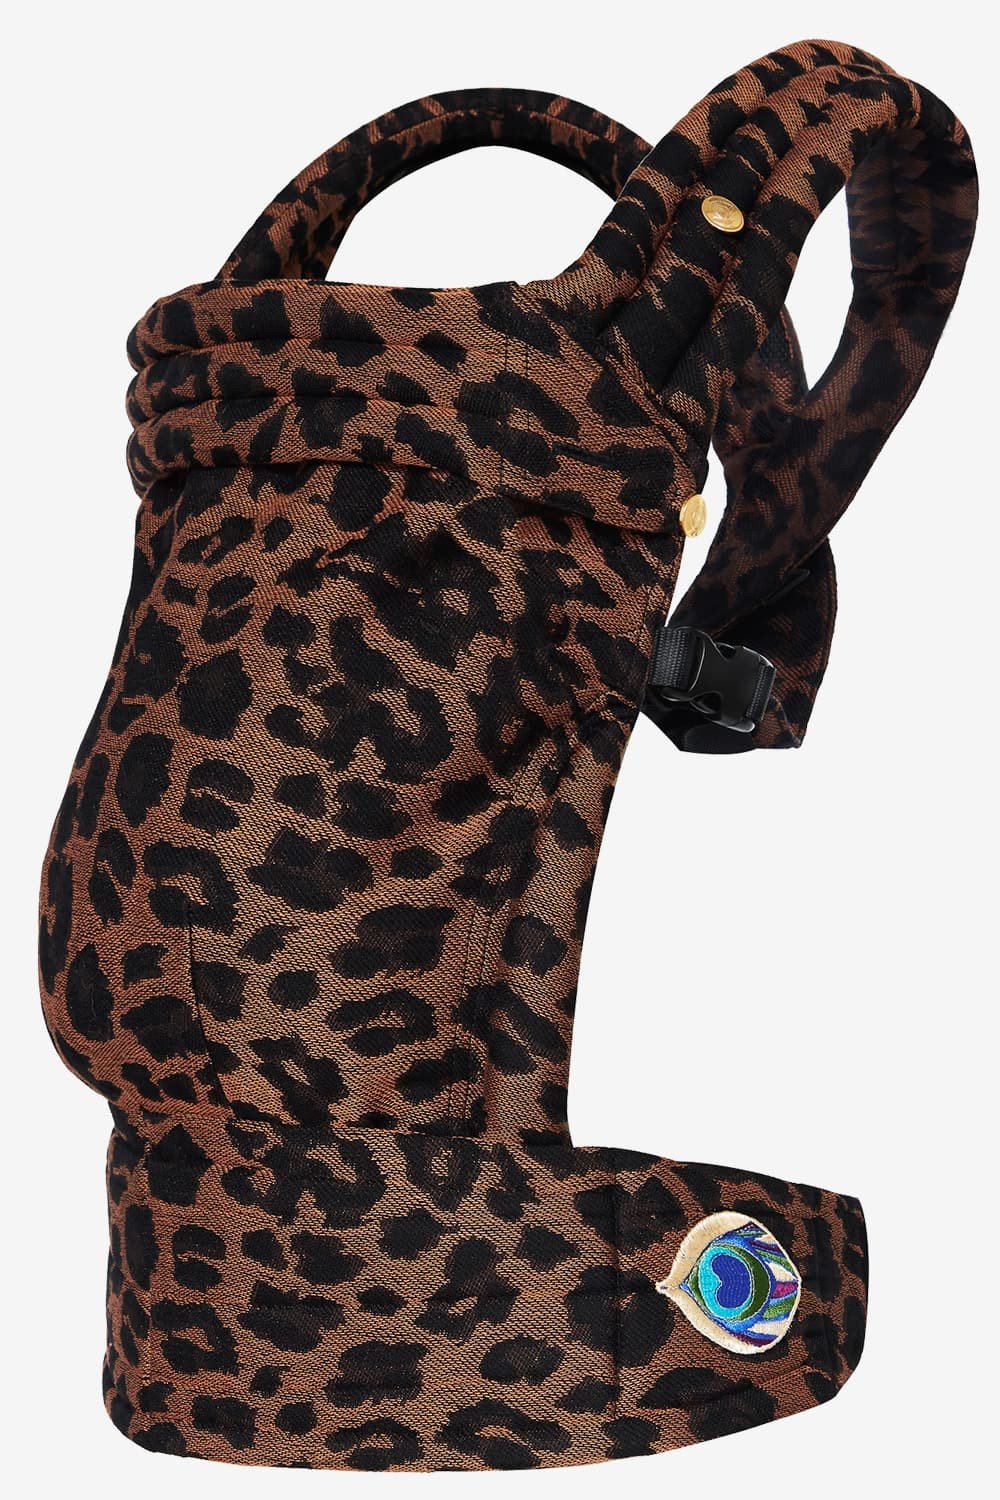 Brown baby carrier with an leopard print in a cotton blend